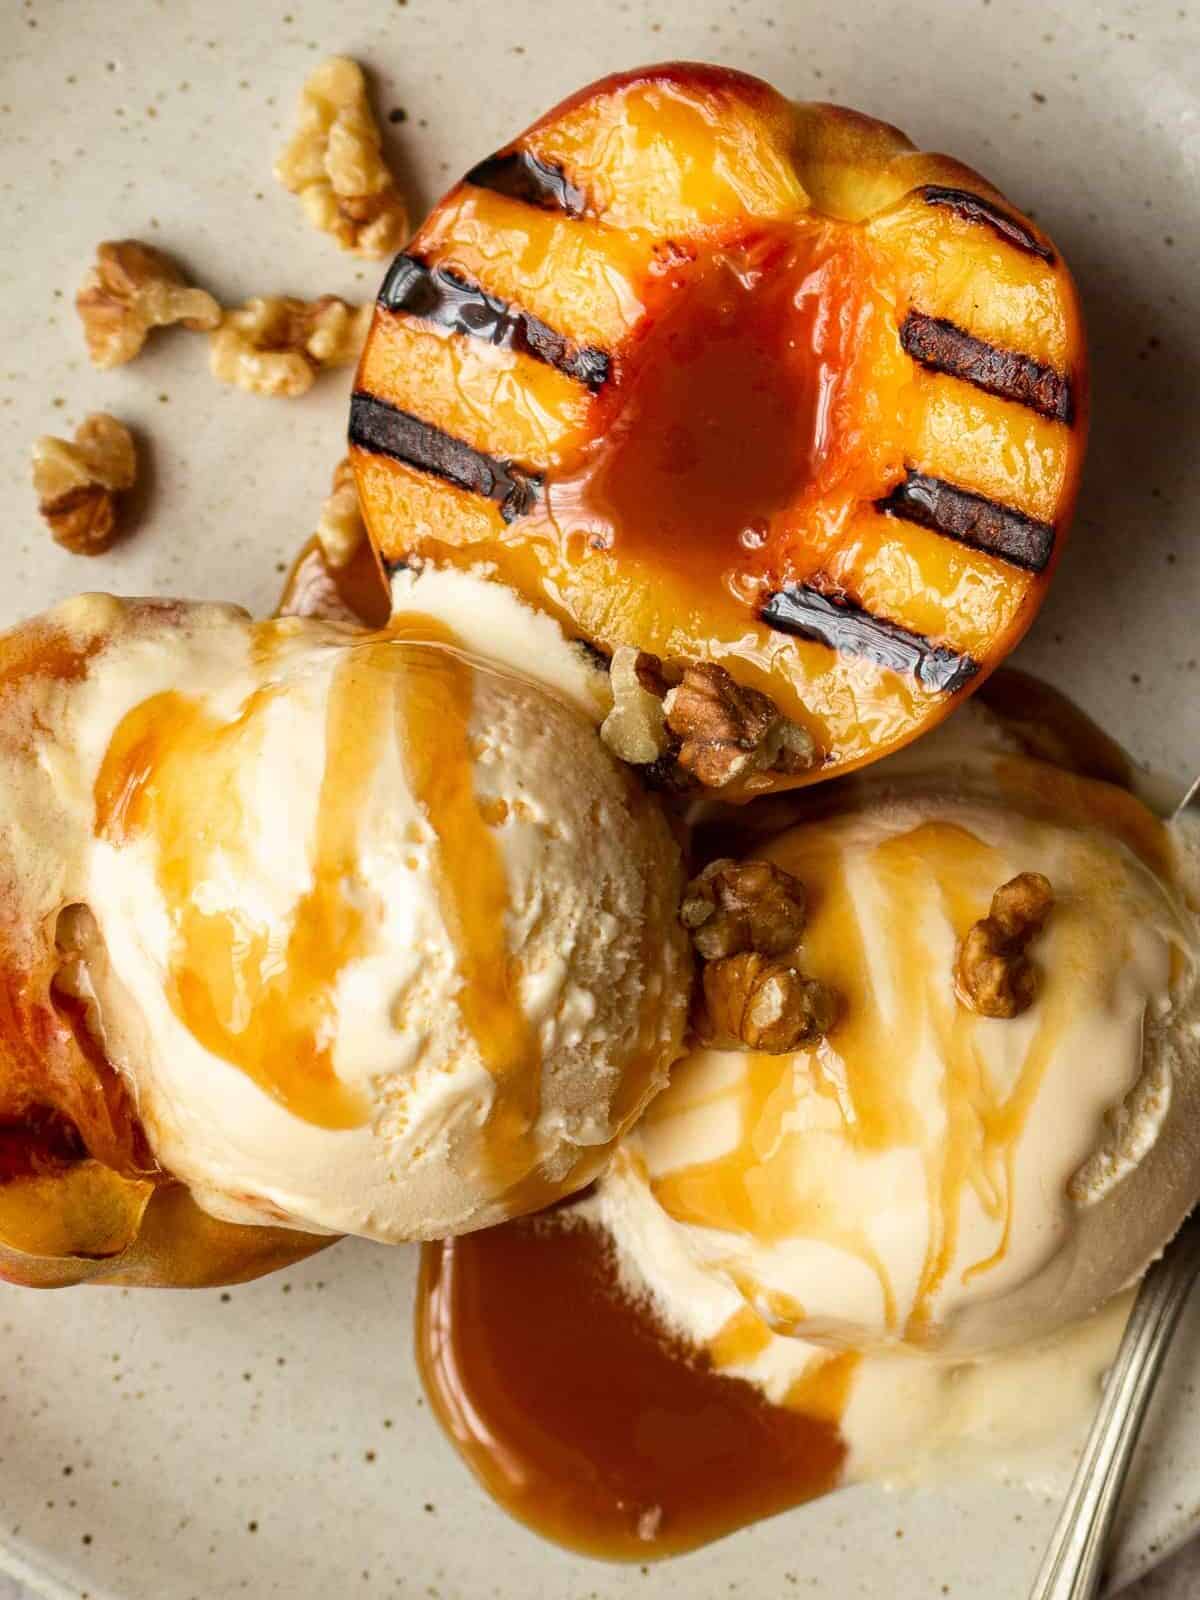 up close grilled peaches with ice cream and caramel sauce